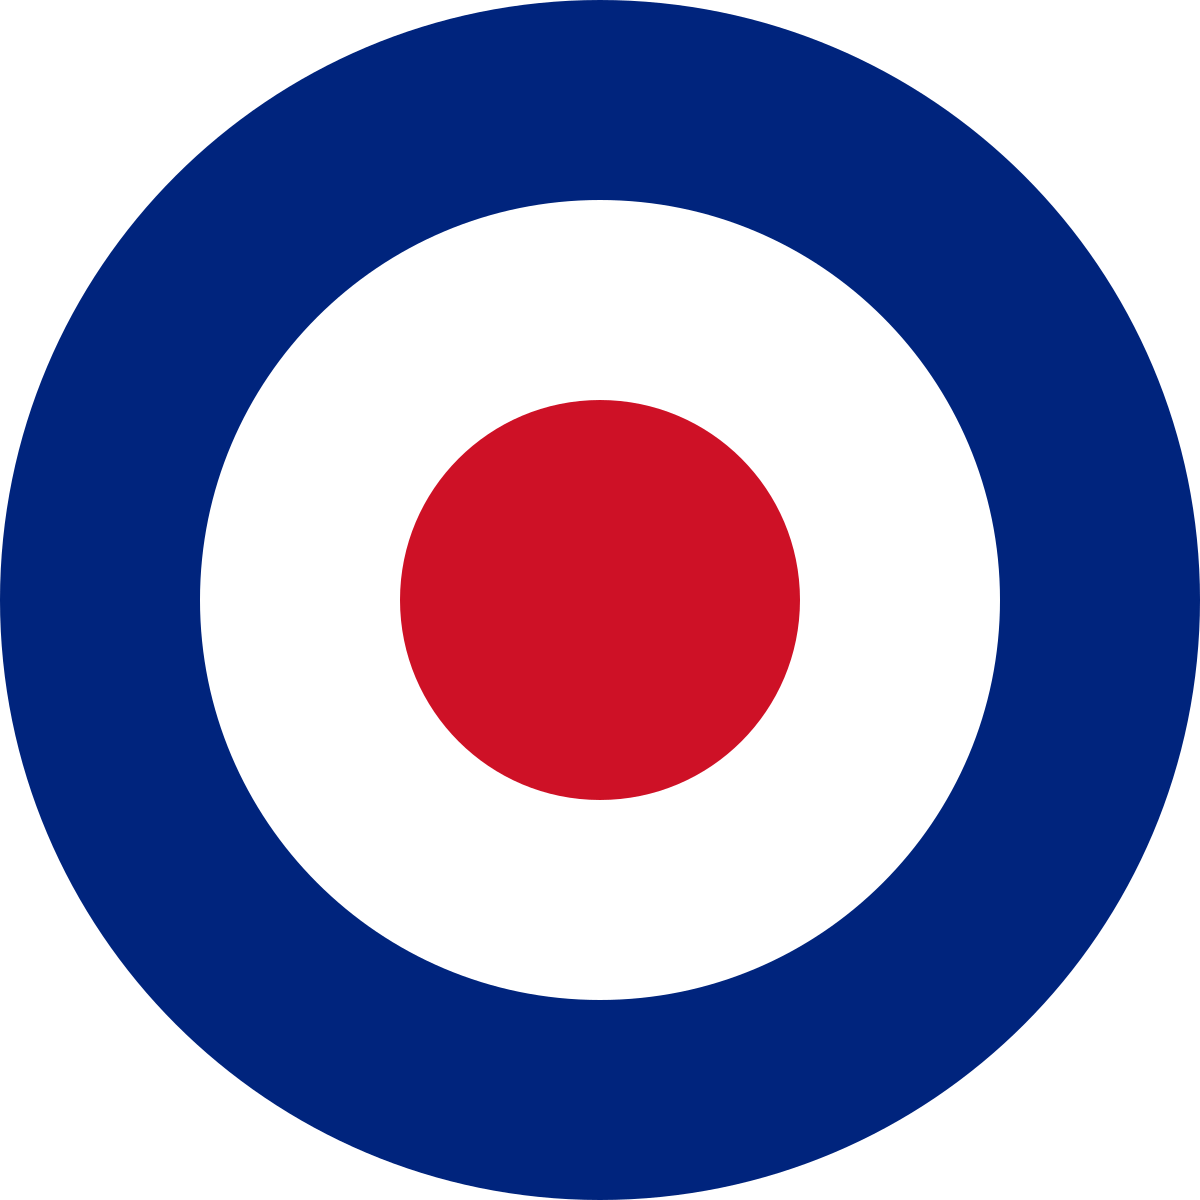 A Inside the Red Circle Logo - Royal Air Force roundels